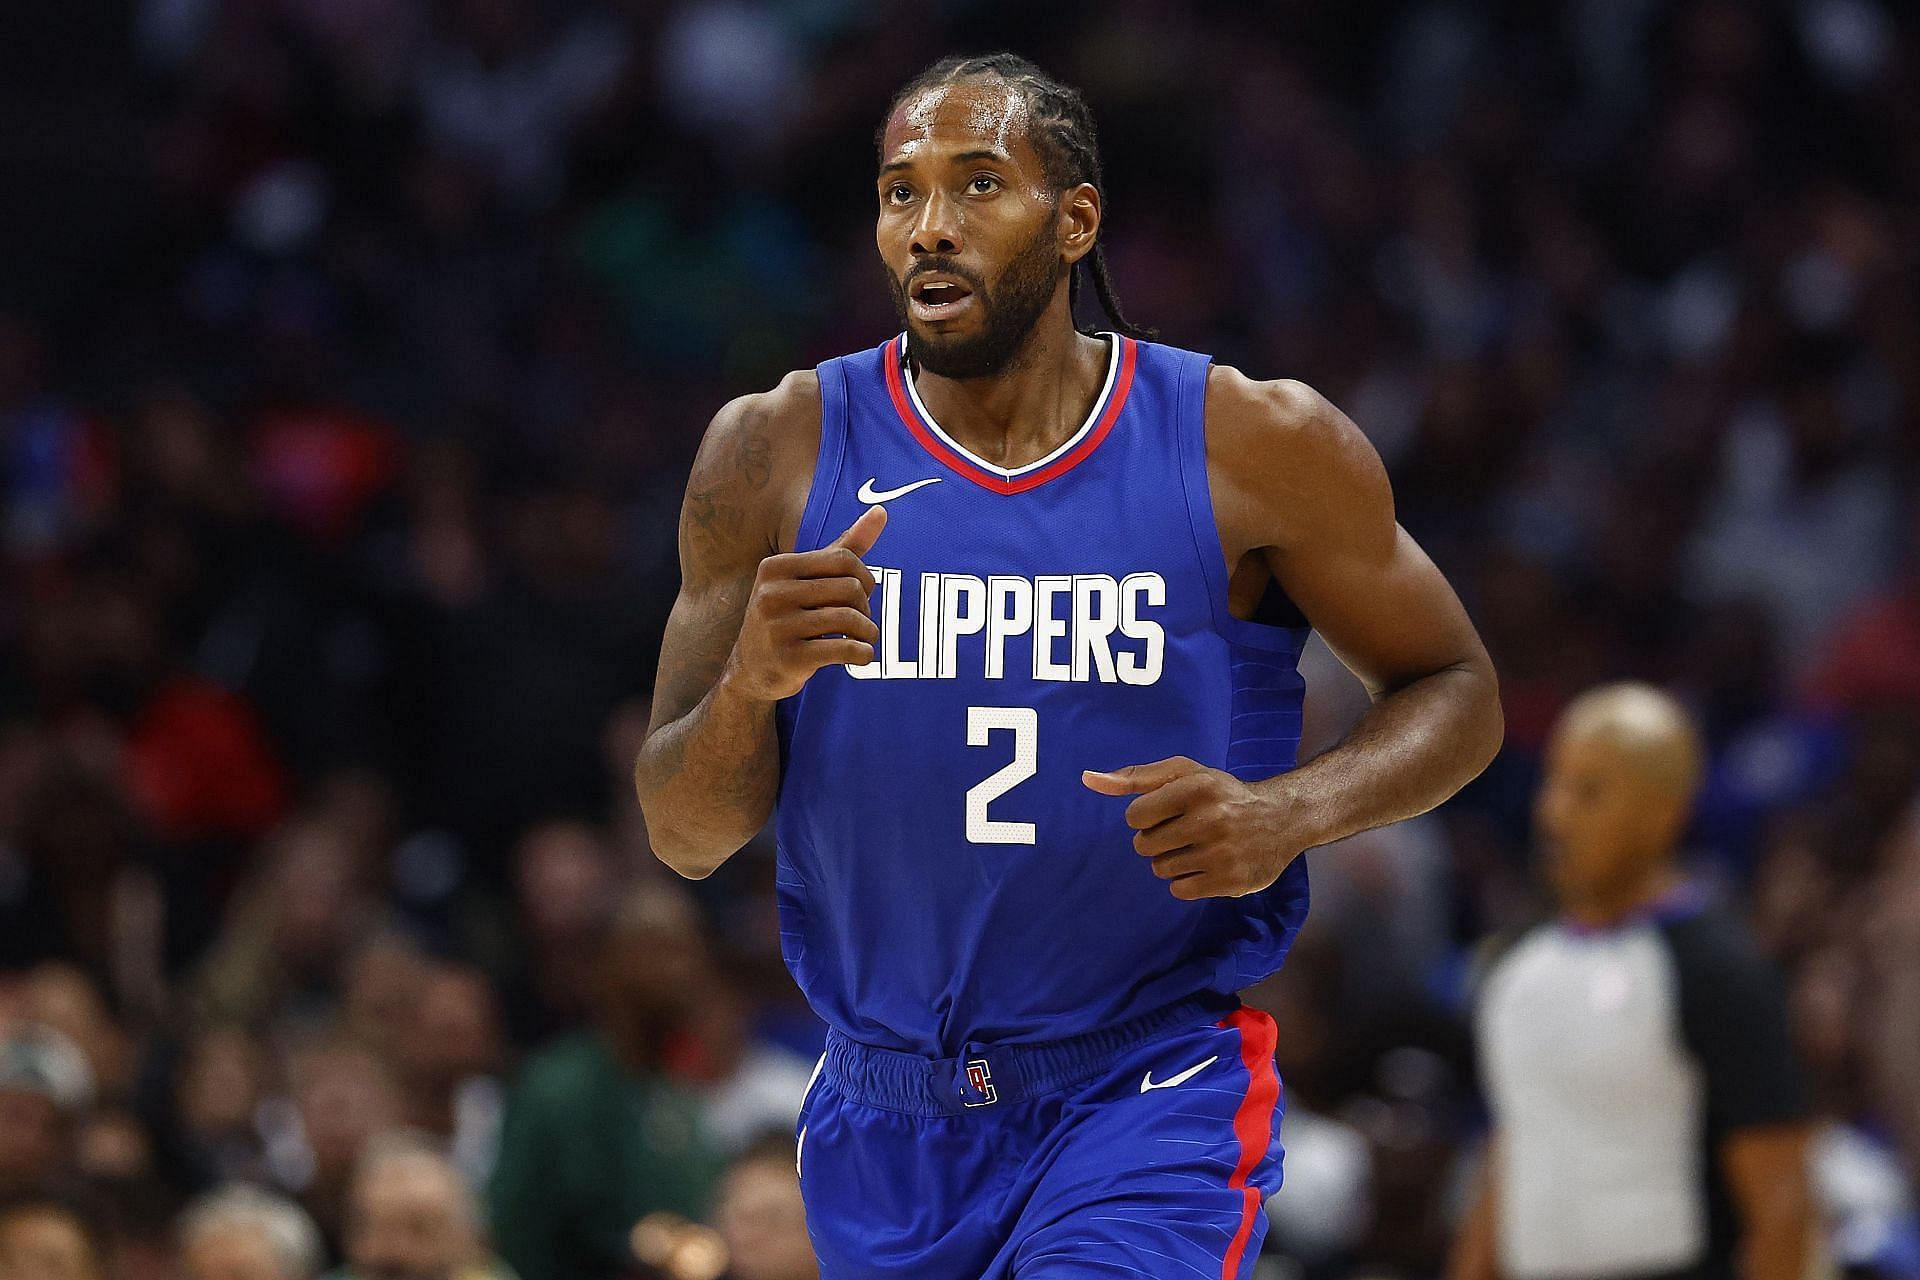 Fans have a mixed reaction to the LA Clippers extending Kawhi Leonard